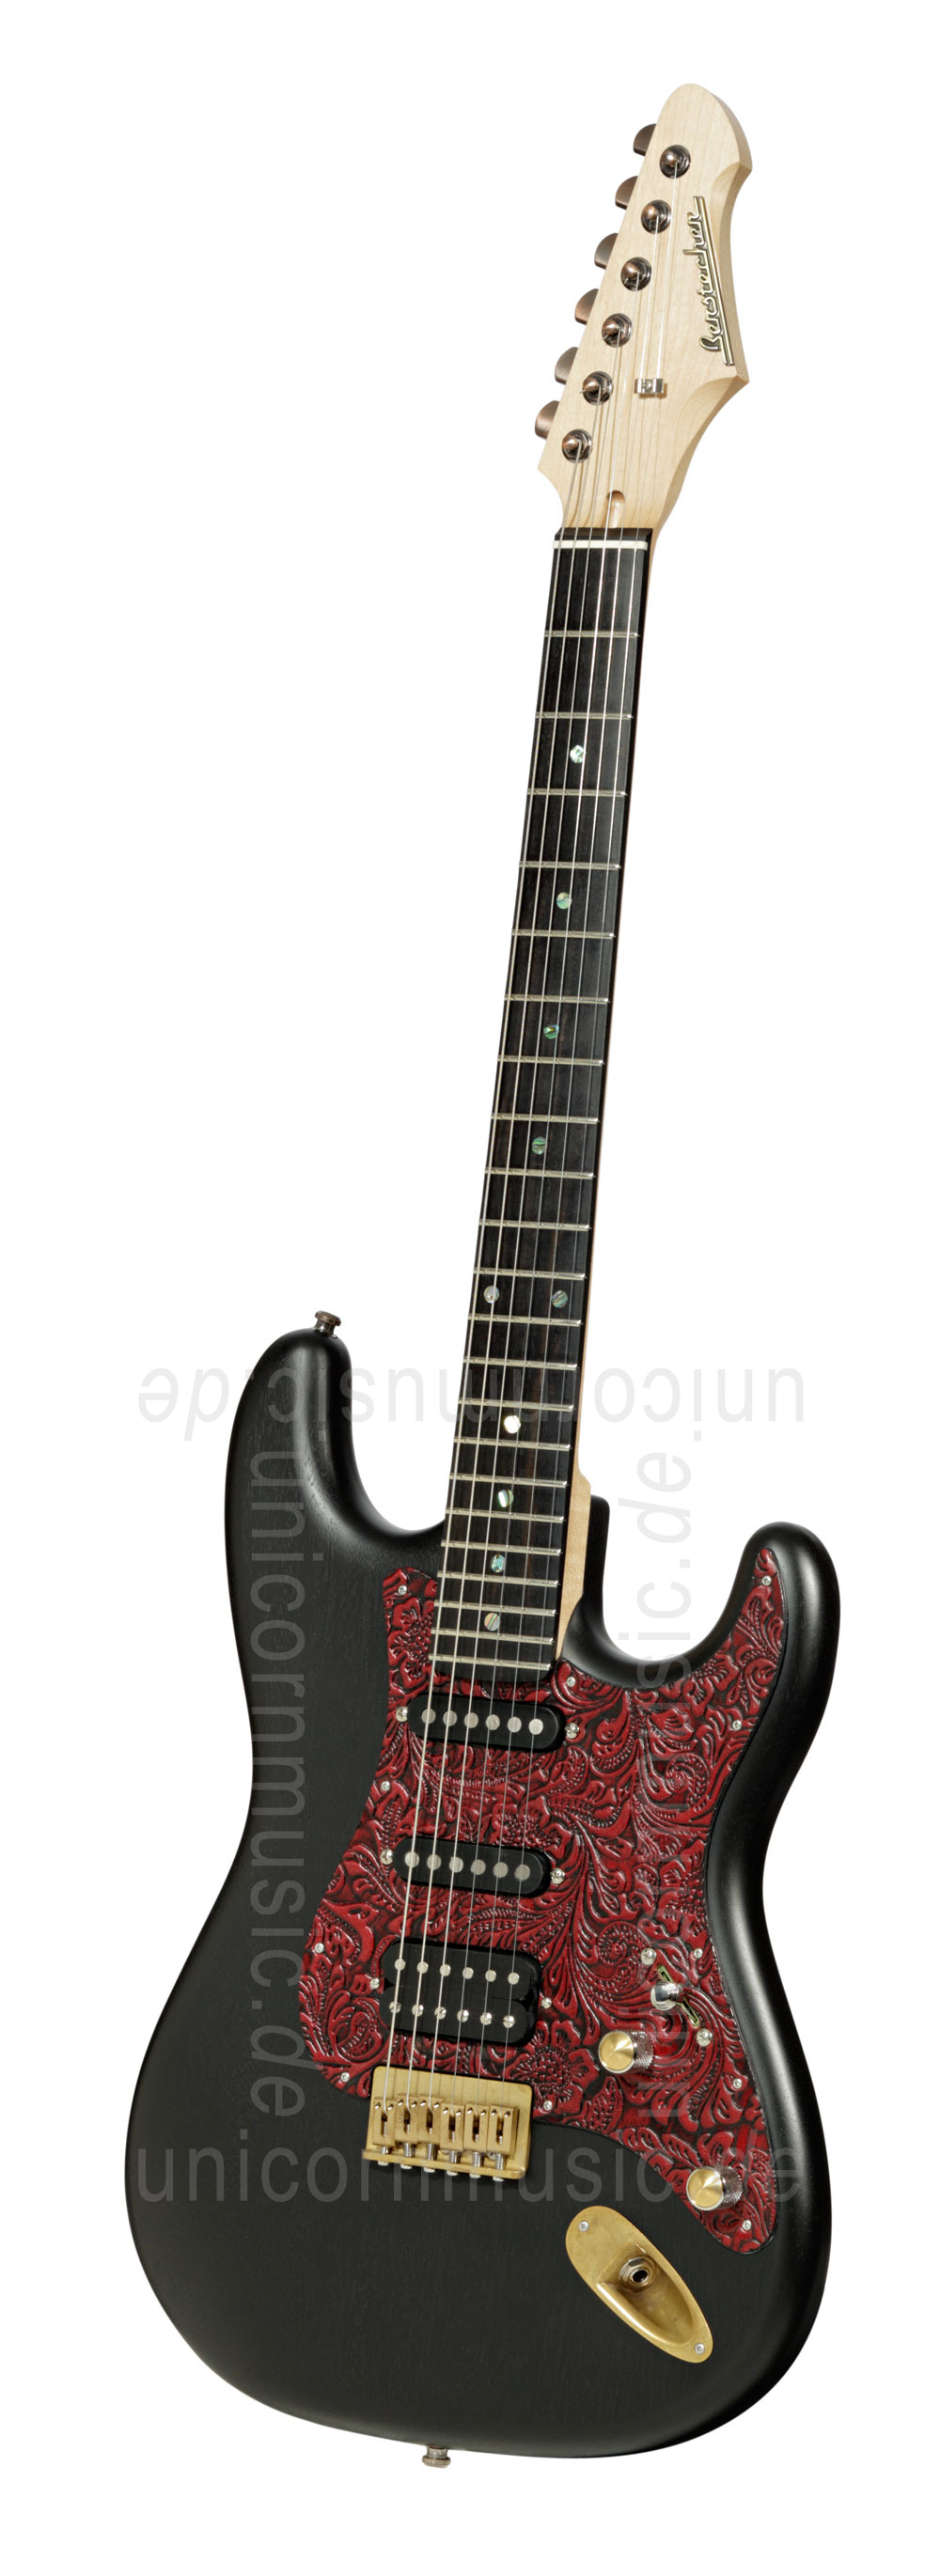 to article description / price Electric Guitar BERSTECHER Vintage 2018 - Black / Floral Red + hard case - made in Germany